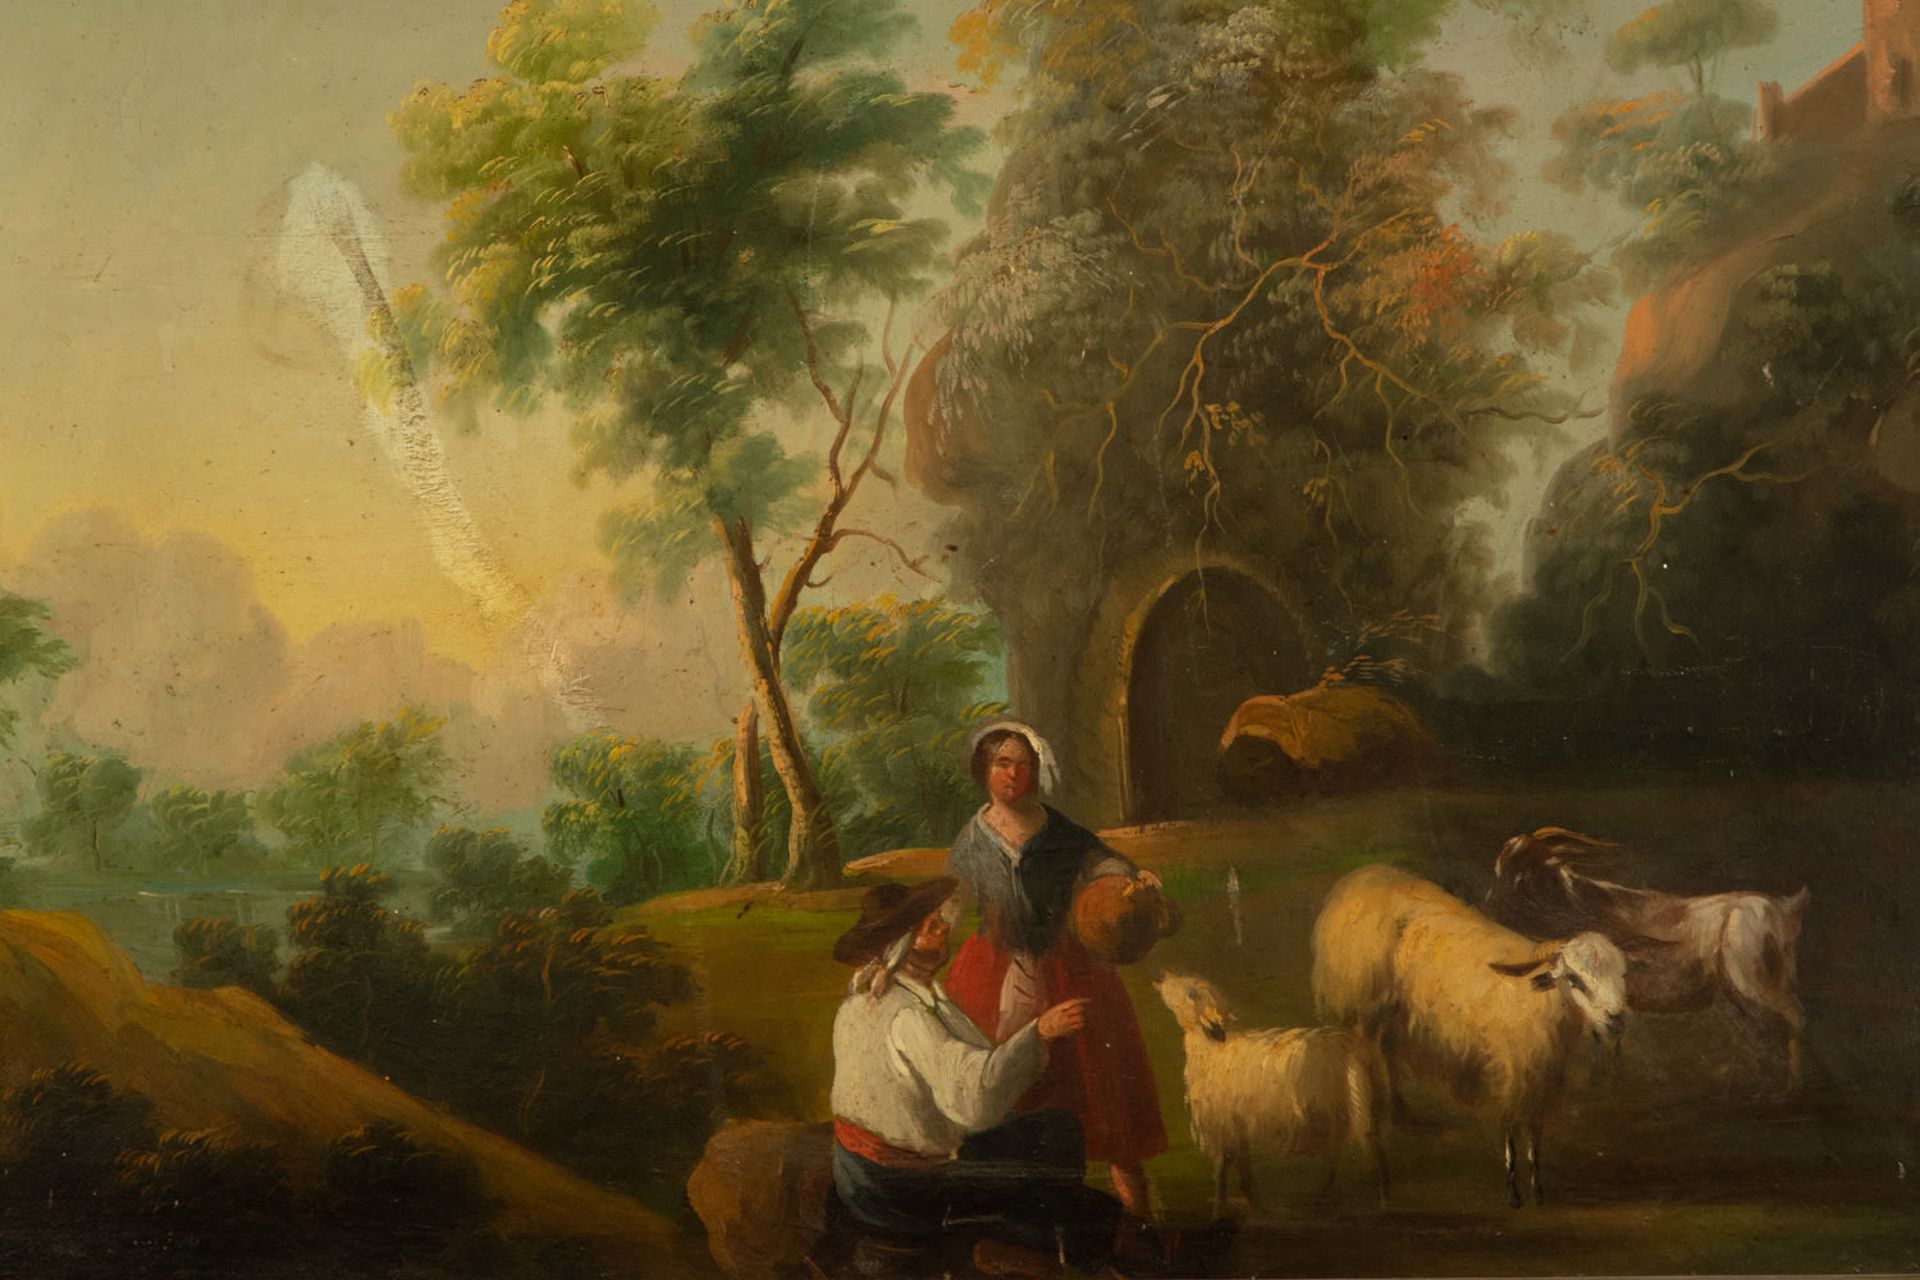 Pair of pastoral scenes on canvas, 19th century French school - Image 2 of 11